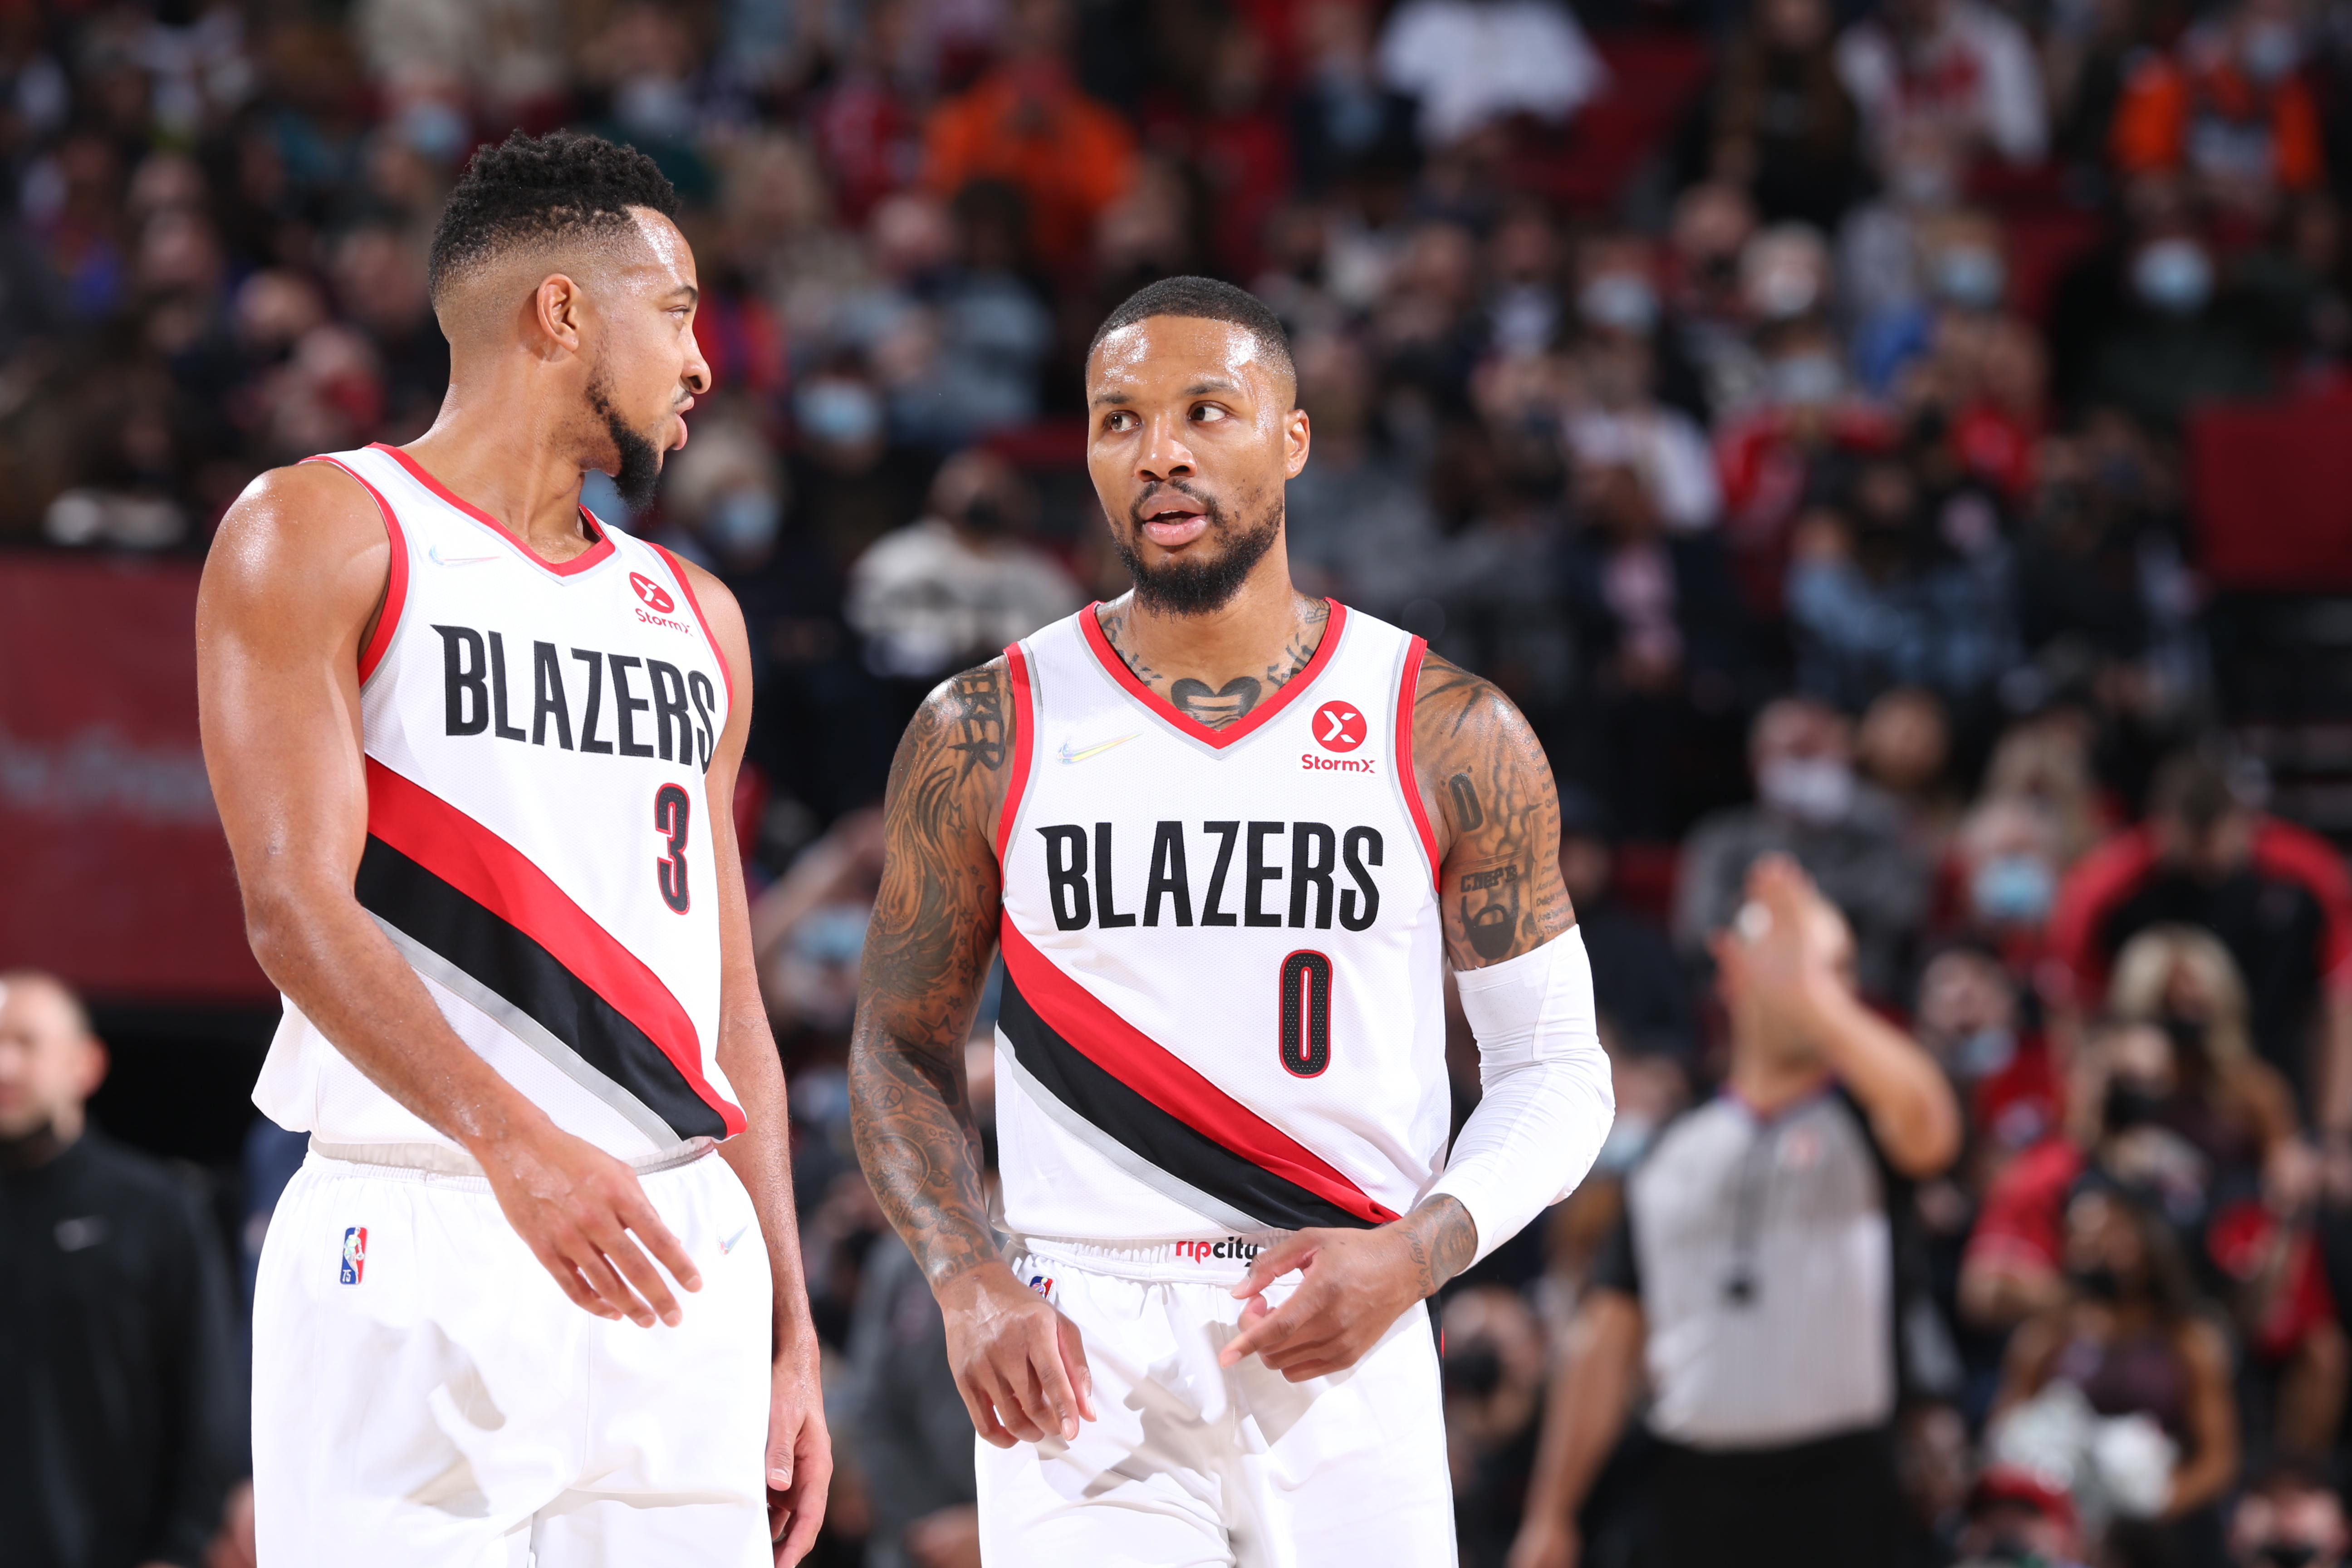 CJ McCollum says Damian Lillard is 'all in' and 'wants to win' with